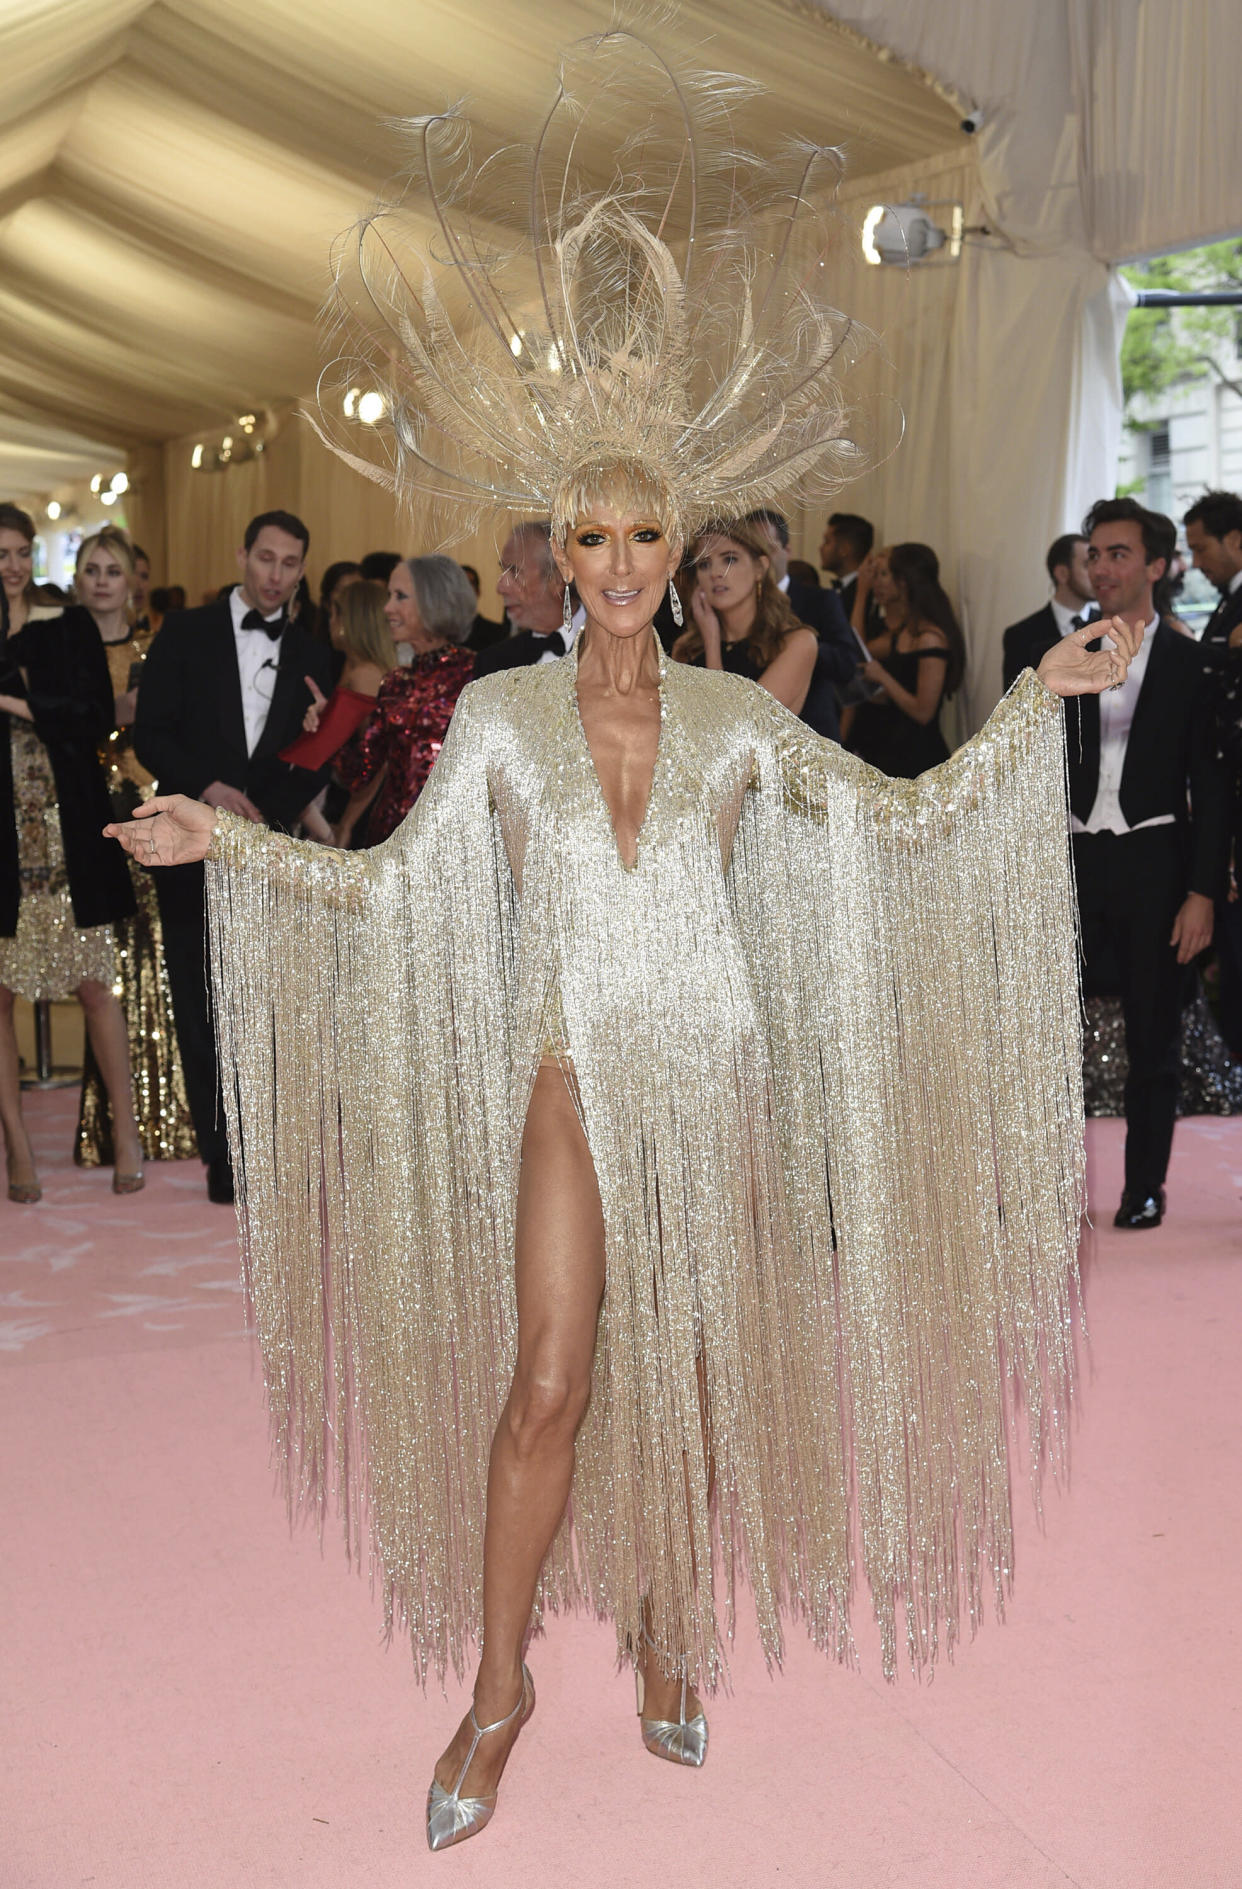 Celine Dion attends The Metropolitan Museum of Art's Costume Institute benefit gala celebrating the opening of the "Camp: Notes on Fashion" exhibition on Monday, May 6, 2019, in New York. (Photo by Evan Agostini/Invision/AP)